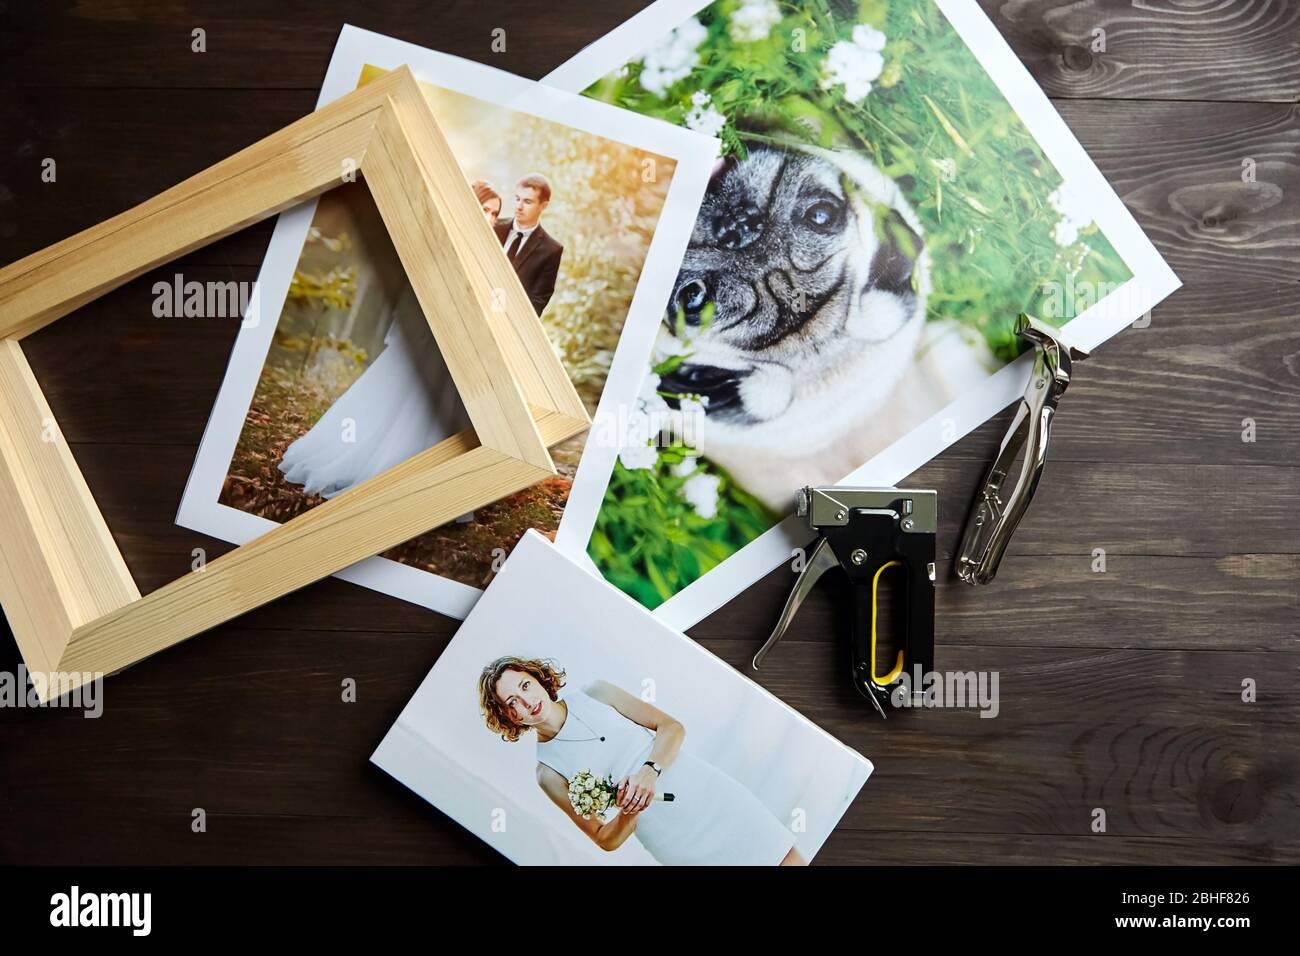 Photo canvas prints. Tools for wrapping.  Photographs, stretcher bars, staple gun and canvas pliers.  Printed photos of a dog and a wedding couple lyi Stock Photo